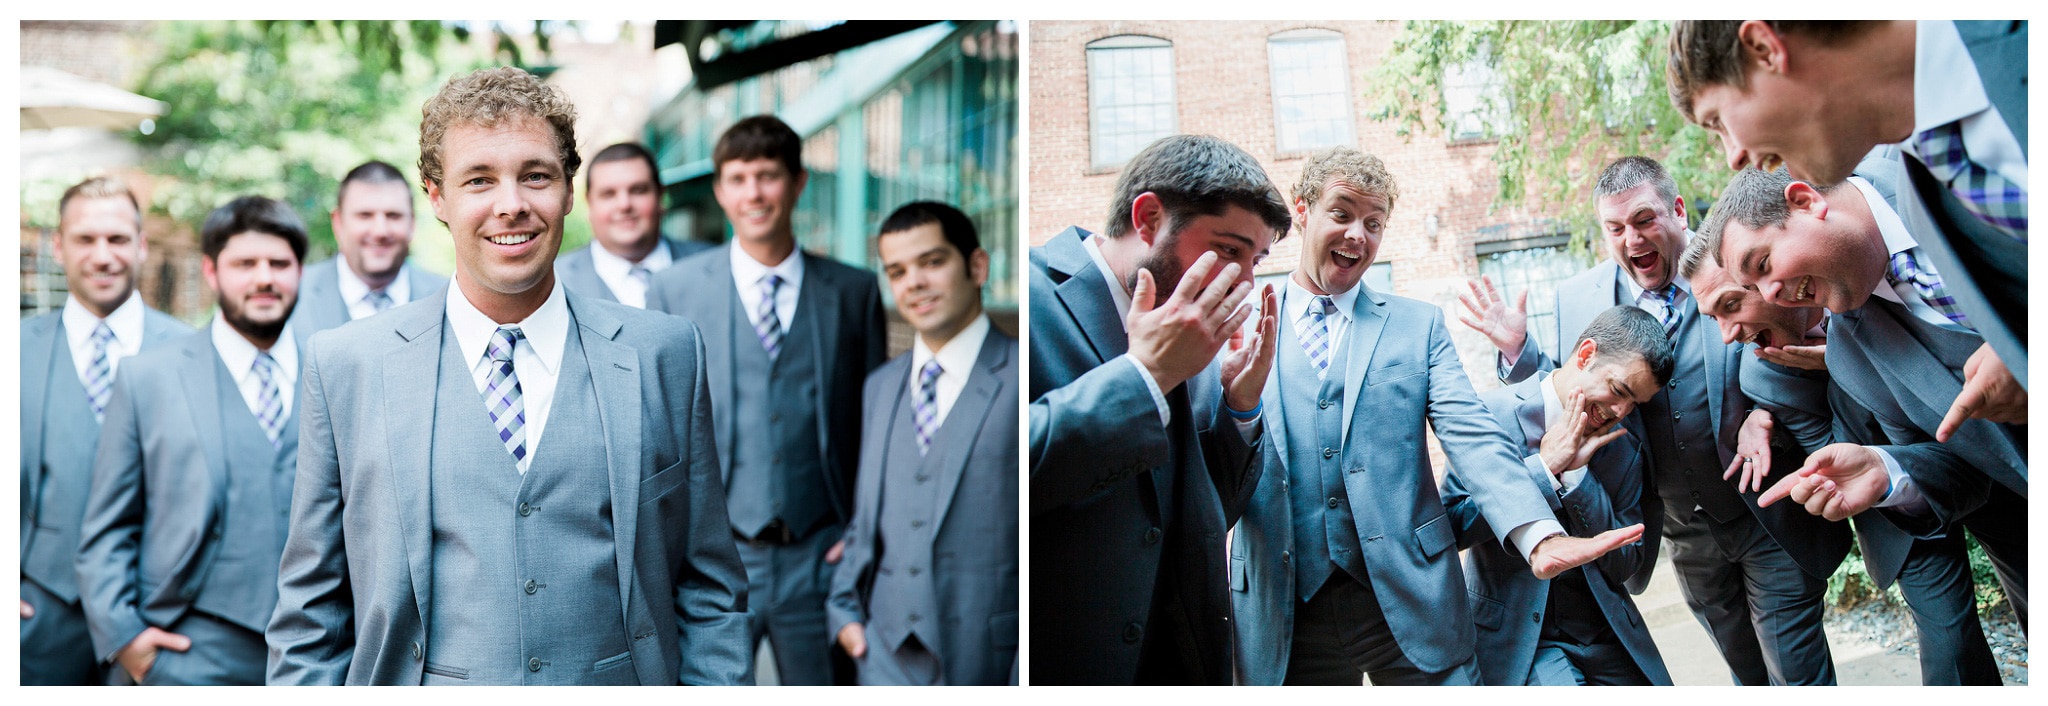 The groom and groomsmen looking dapper Venue and Catering – King plow Event Gallery and Bold American Events Decor and flowers – Stylish Stems Music and Band – Seven Sharp Nine Transportation – Georgia Trolley Photographer One Life Photography